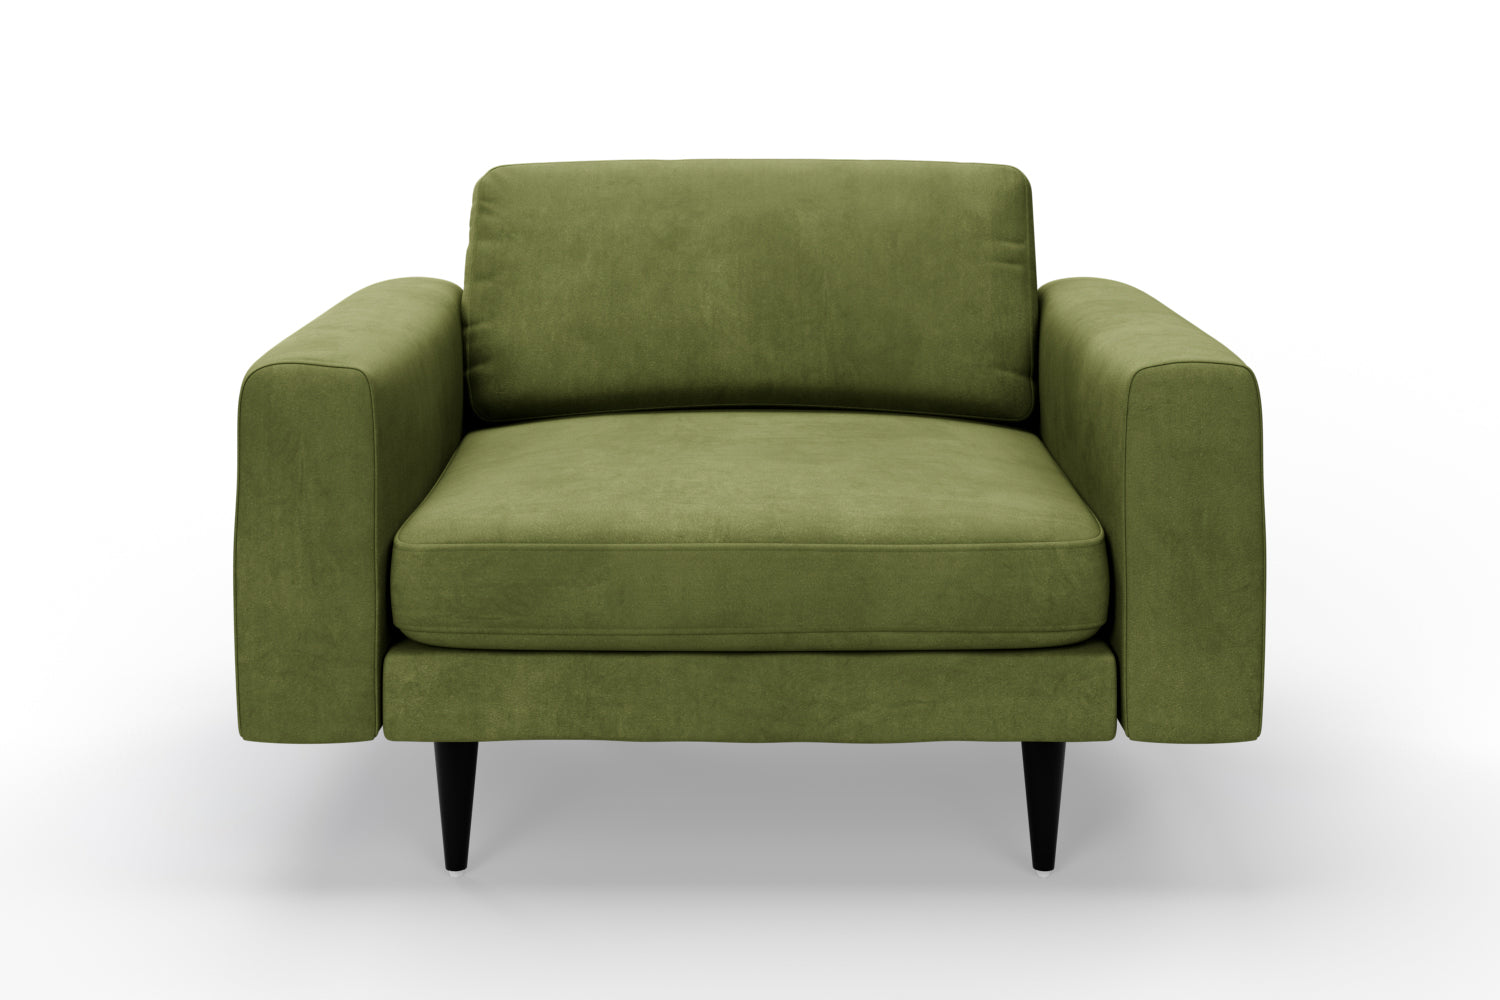 SNUG | The Big Chill 1.5 Seater Snuggler in Olive variant_40414876237872